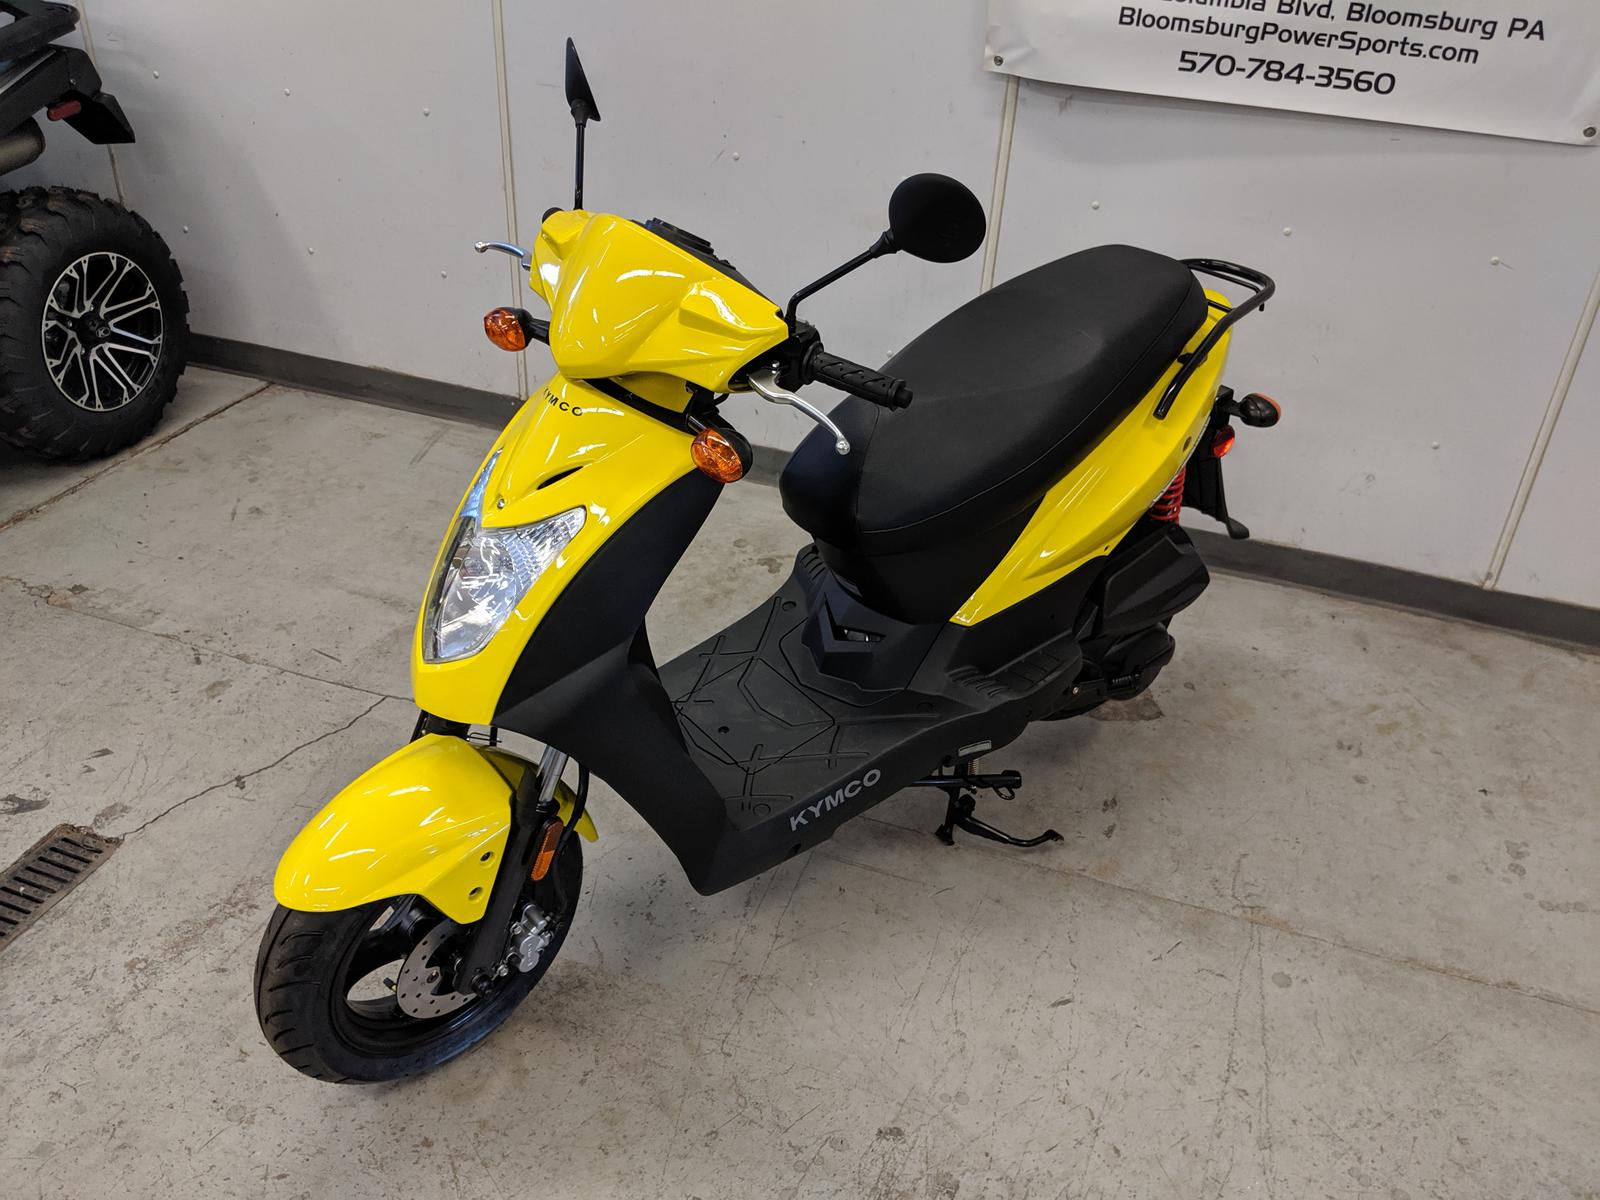 Kymco Agility For Sale In Bloomsburg Pa